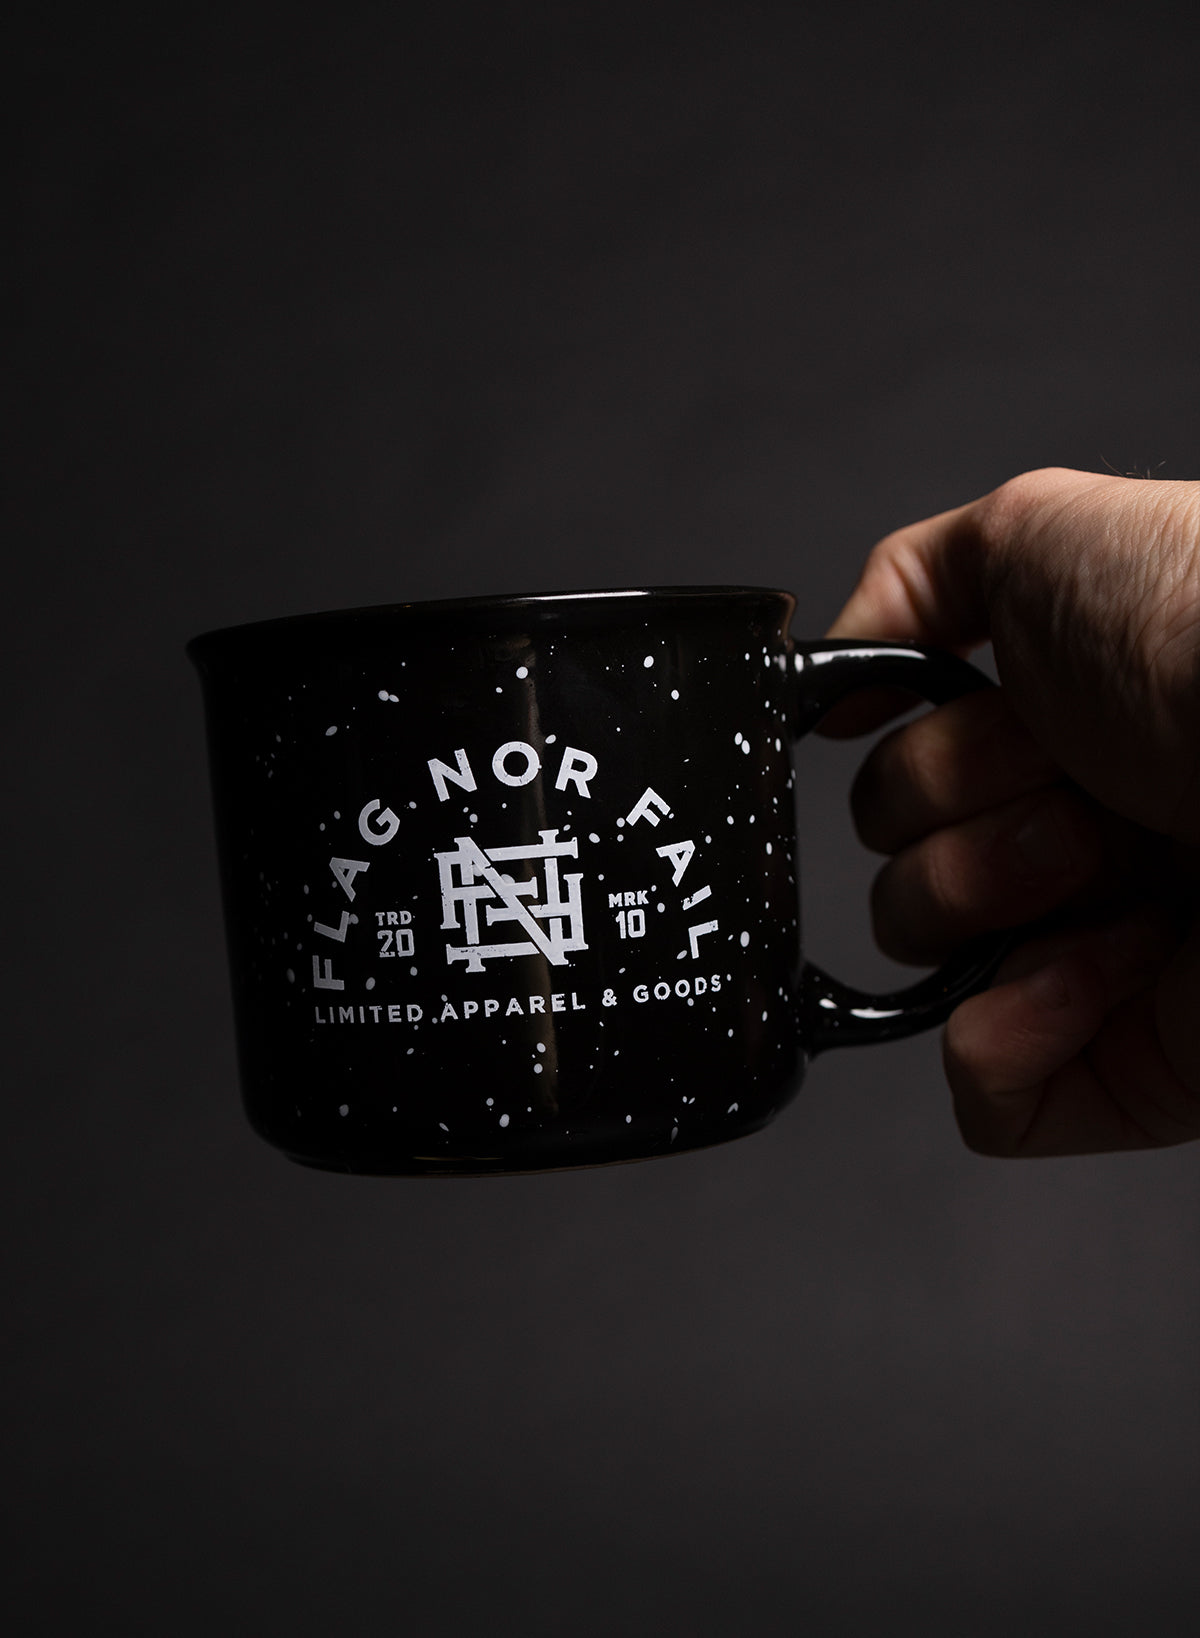 Ceramic mug. Black in color with white speckles. Featuring a white Flag nor Fail logo.